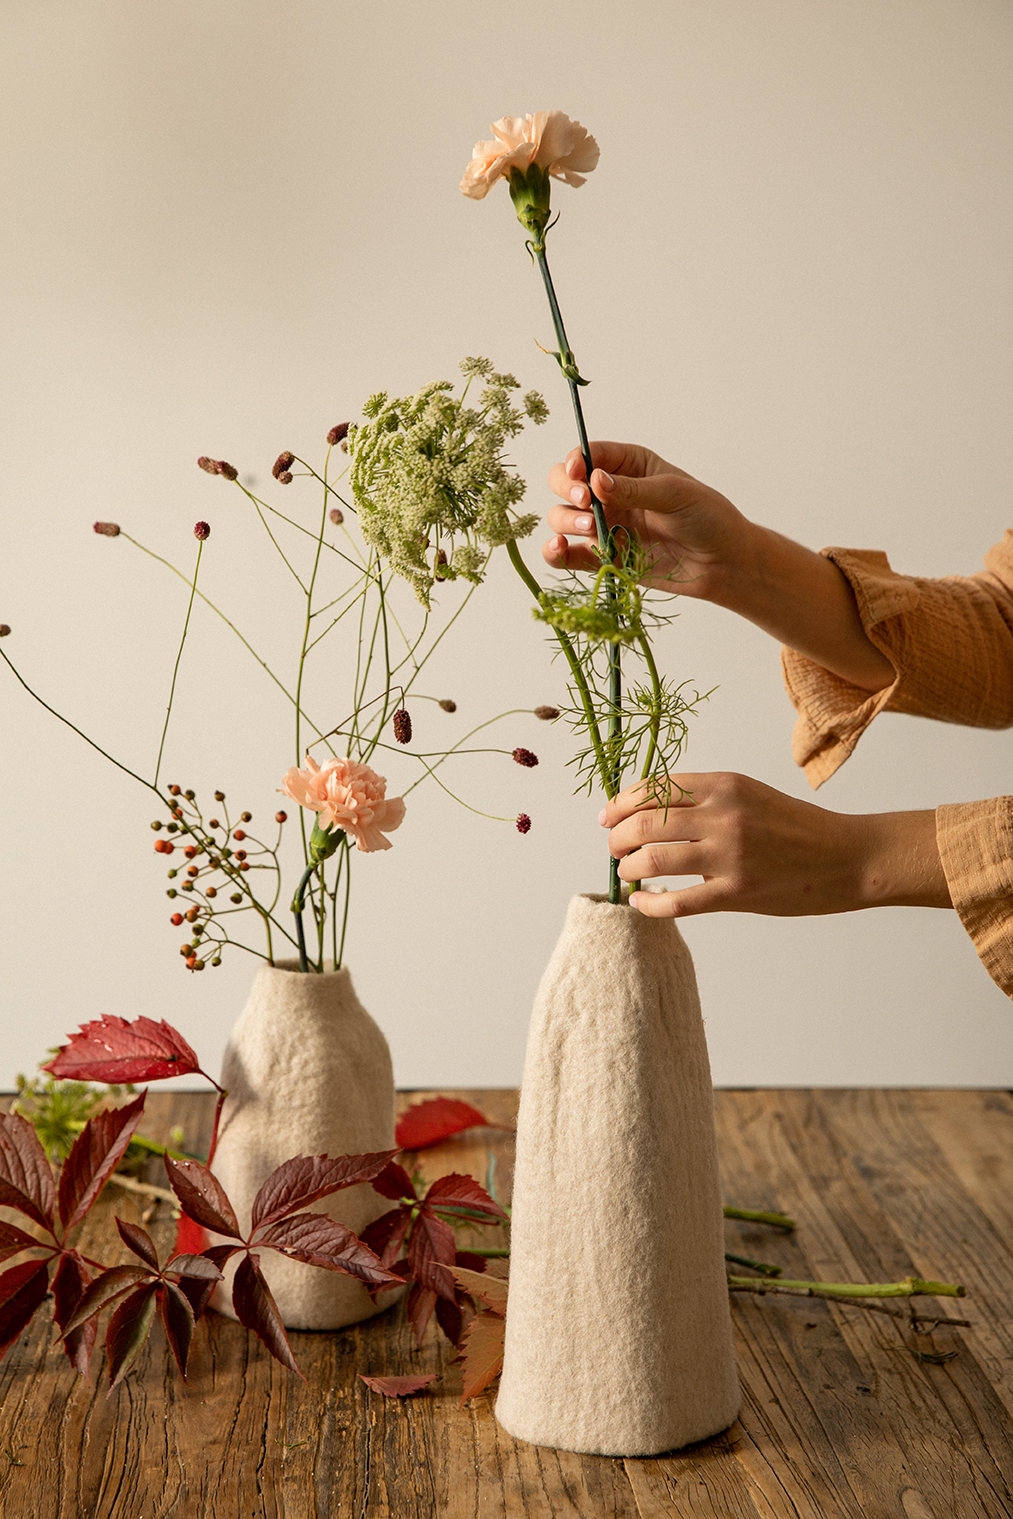 Woman slipping some flowers in two vases in wool felt